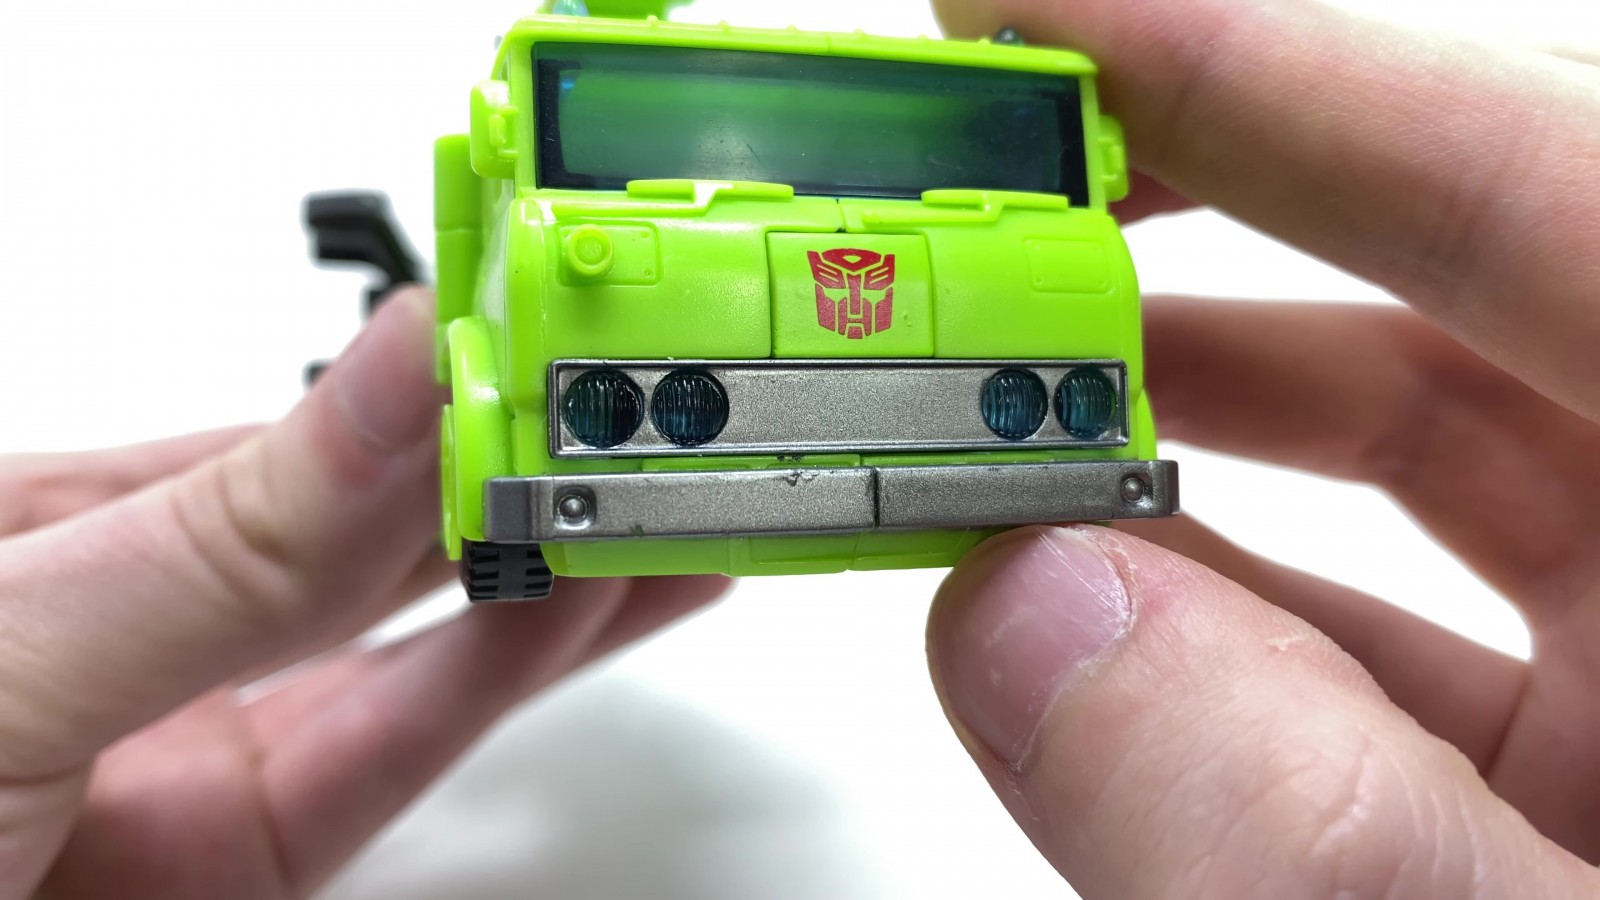 Transformers News: In Hand Images of Velocitron Hauler